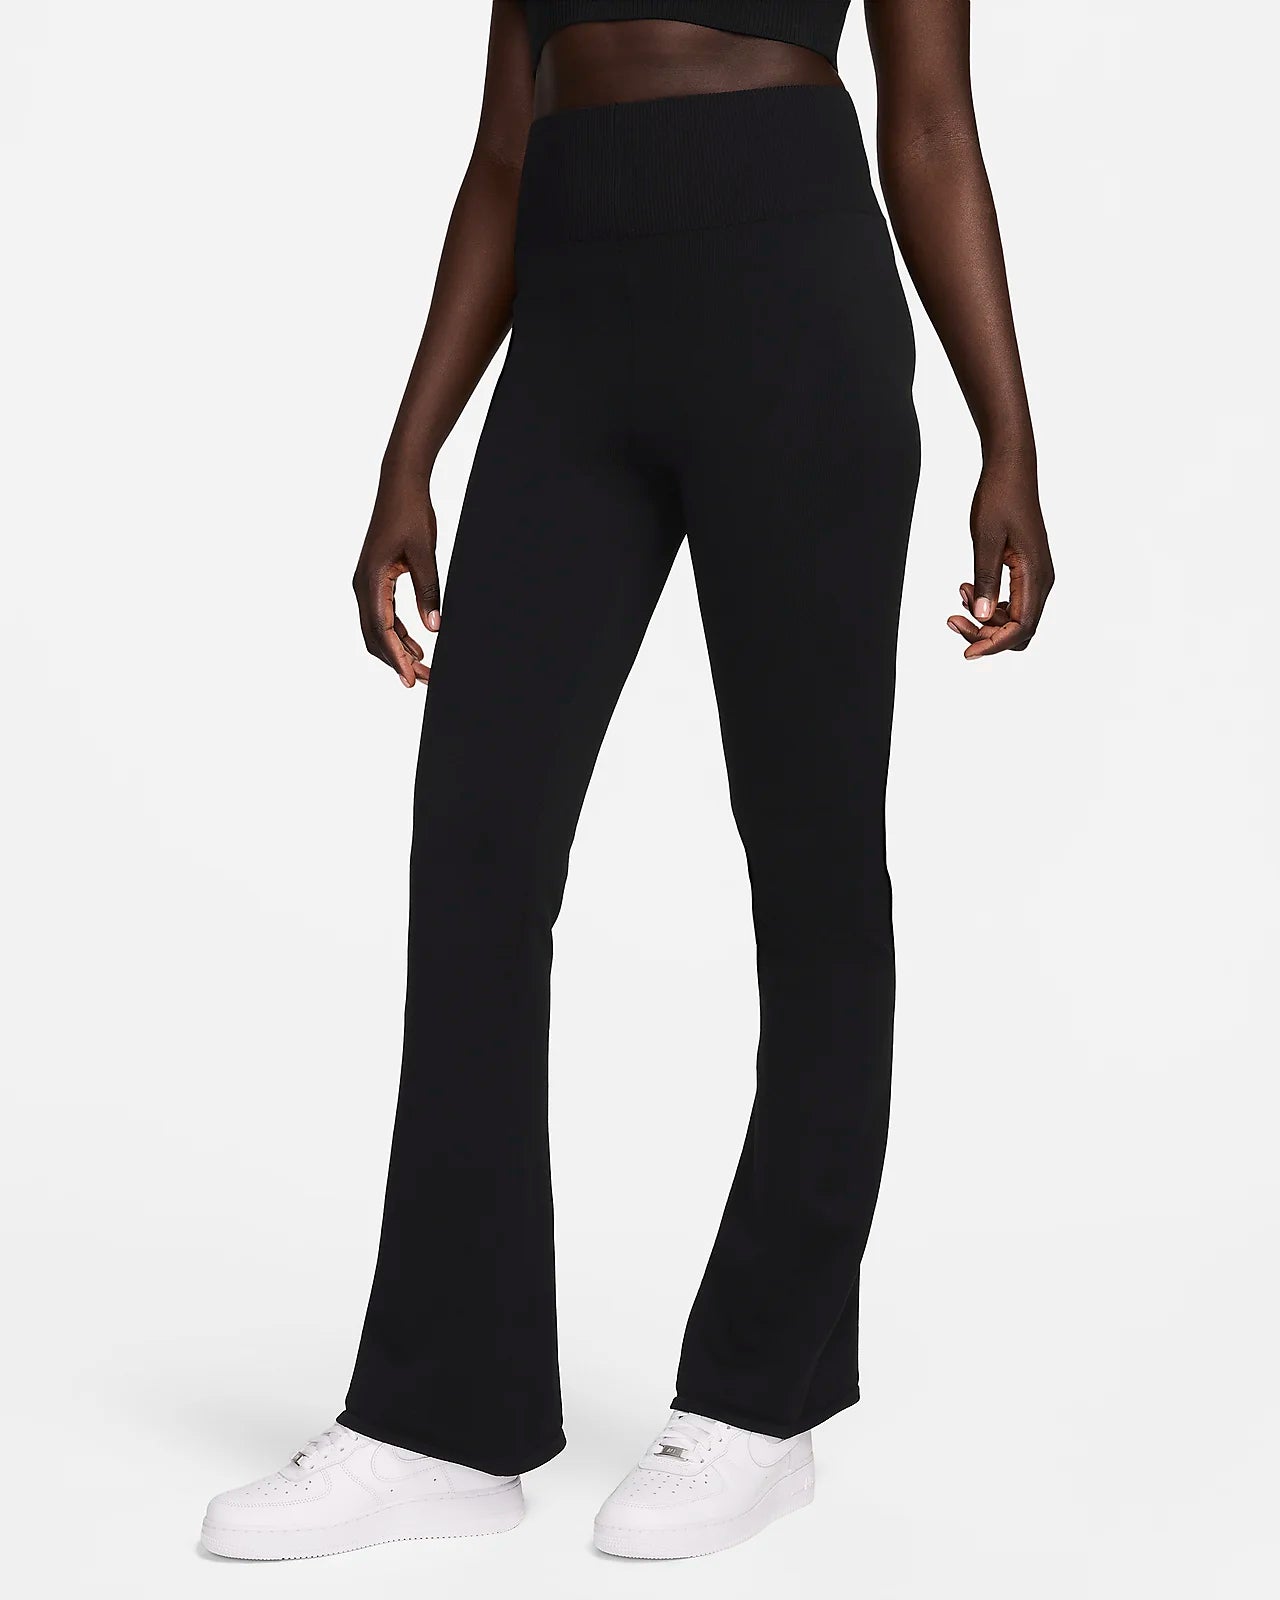 Nike Sportswear Chill Knit
Women's Tight High-Waisted Sweater Flared Pants